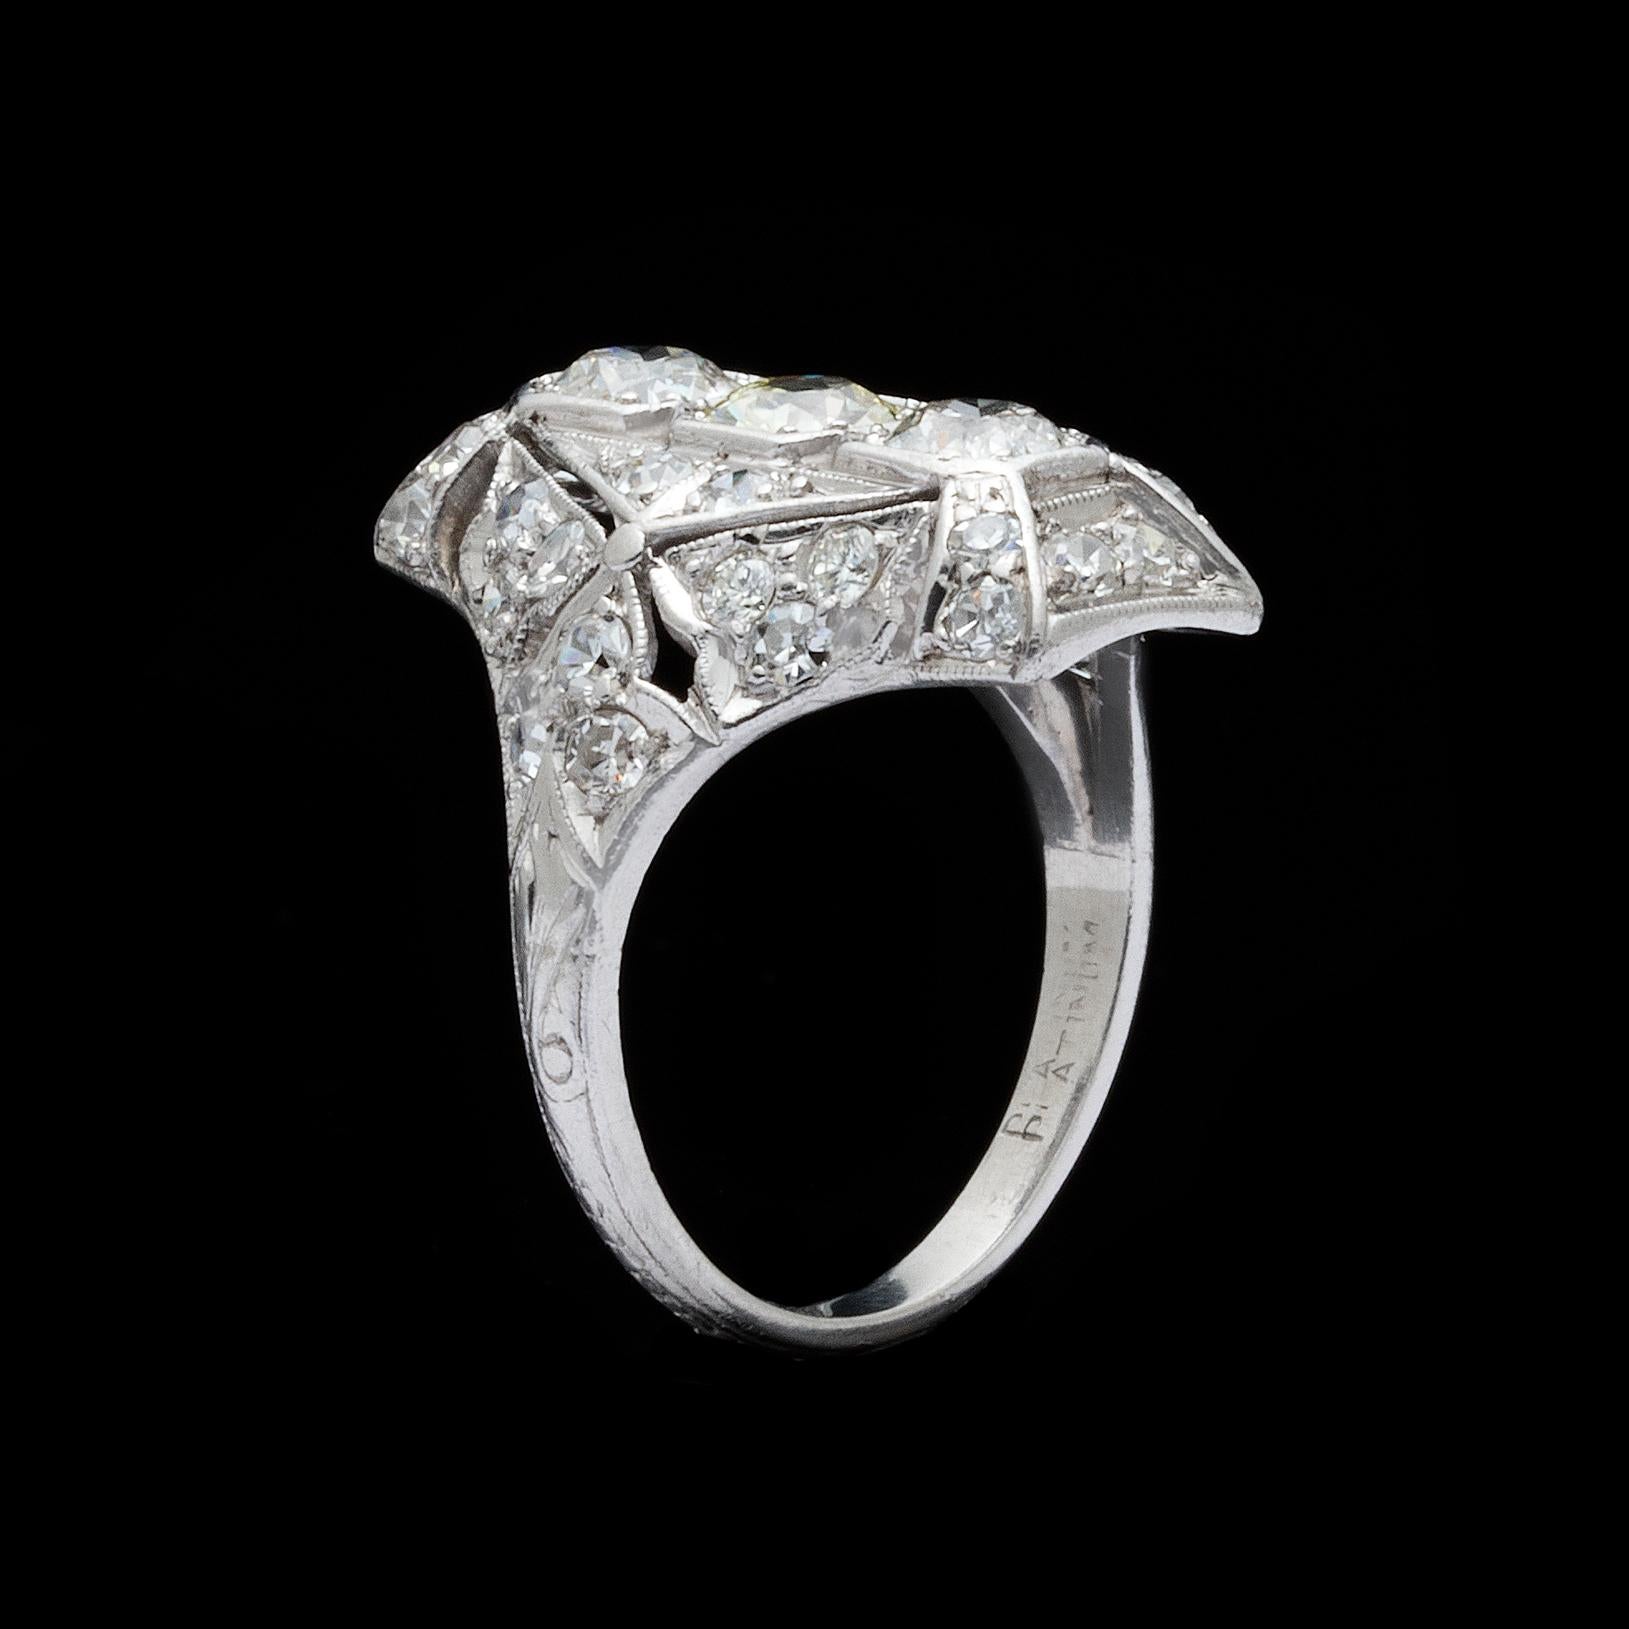 Edwardian Old European Cut Diamond Dinner Ring, circa 1915 In Excellent Condition For Sale In San Francisco, CA